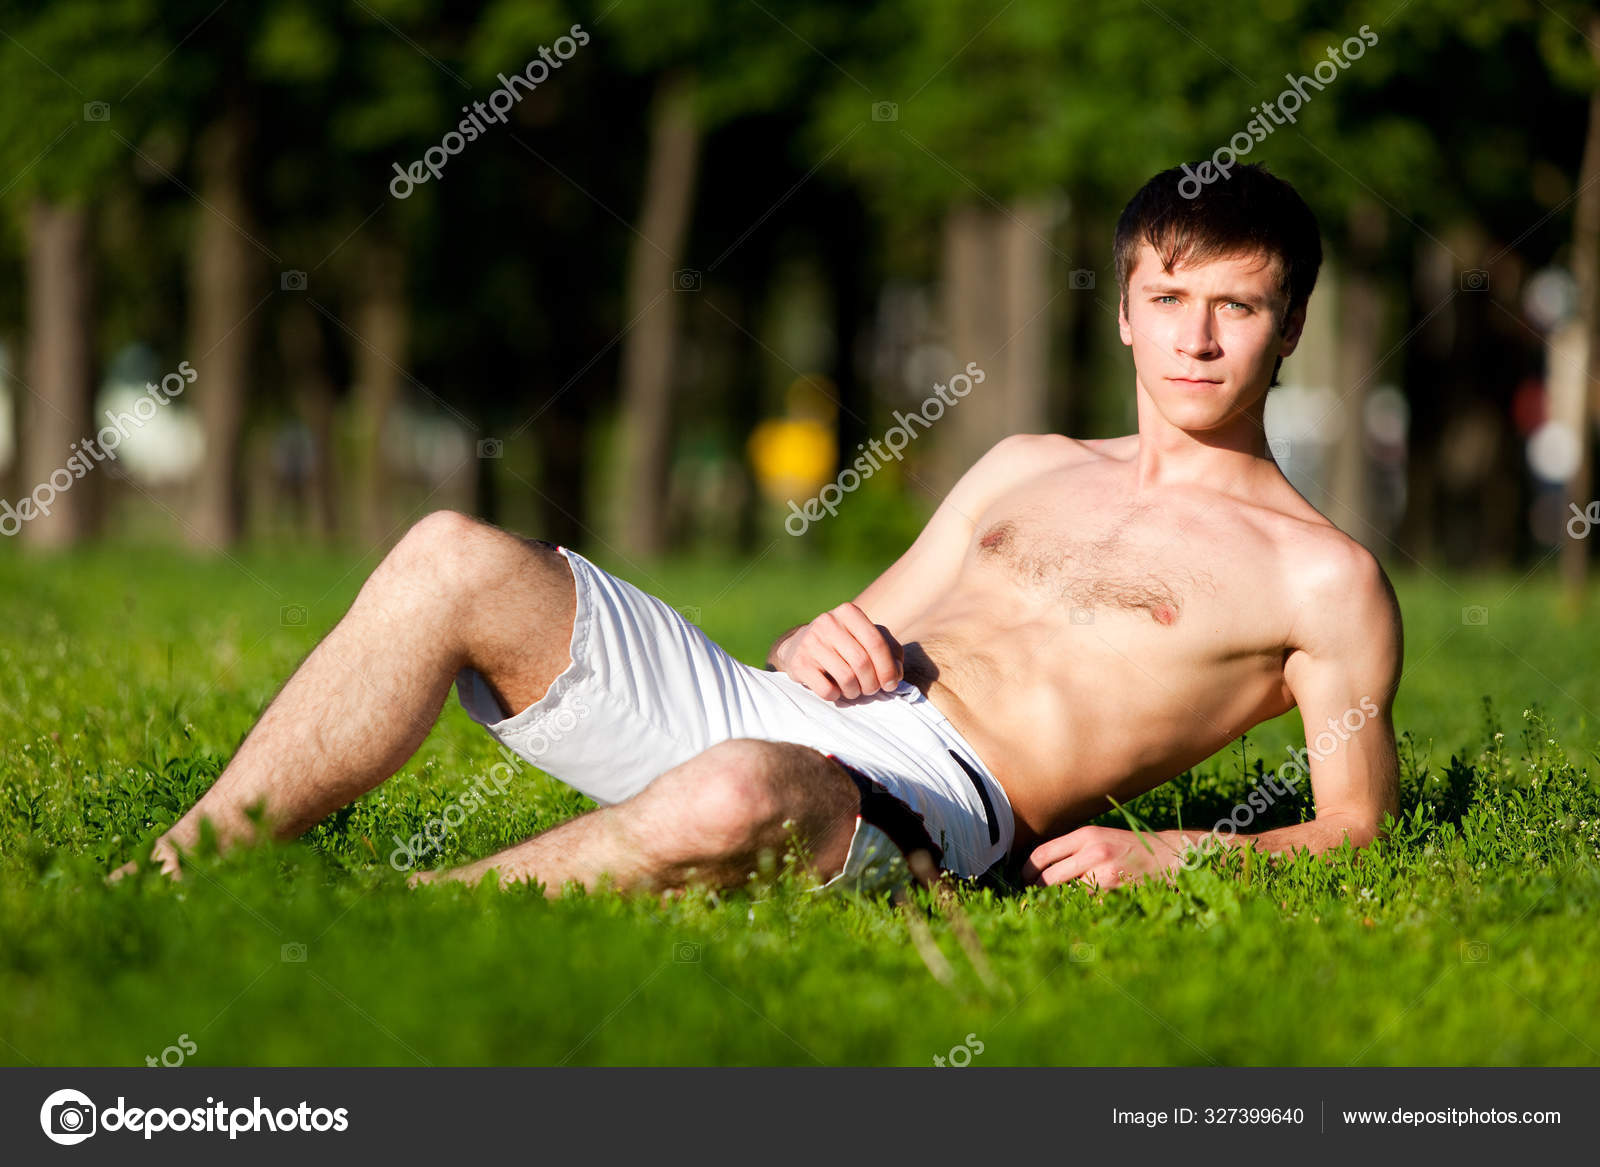 Naked On The Lawn